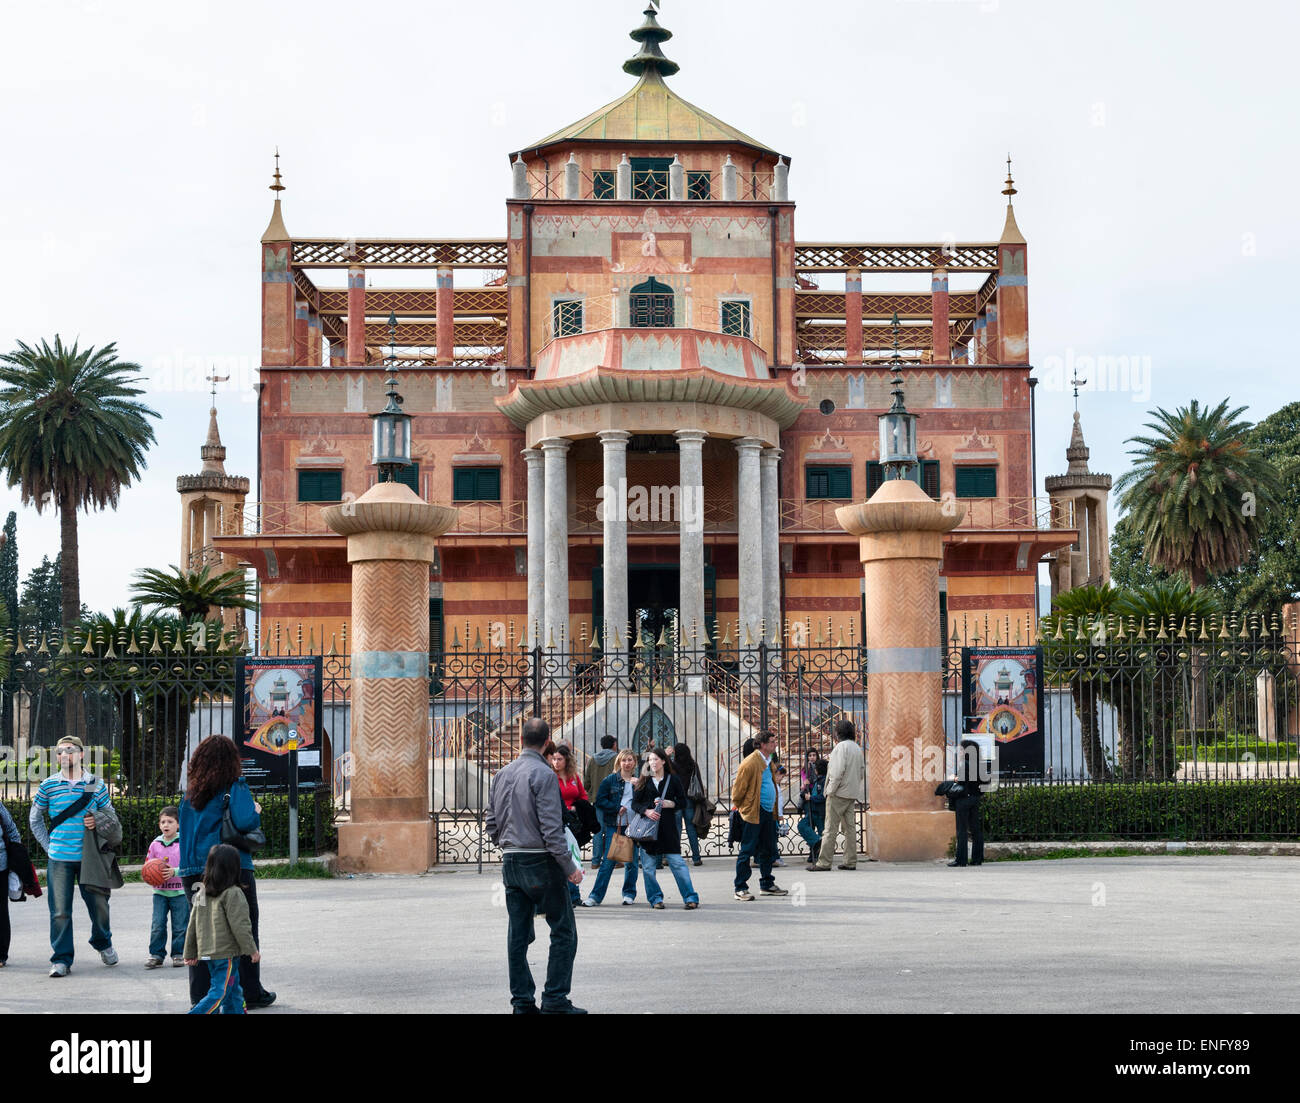 The Palazzina Cinese, Palermo, Sicily. Built in the 'Chinese' style in 1799, the palace belonged to the ruling Bourbon family. Stock Photo